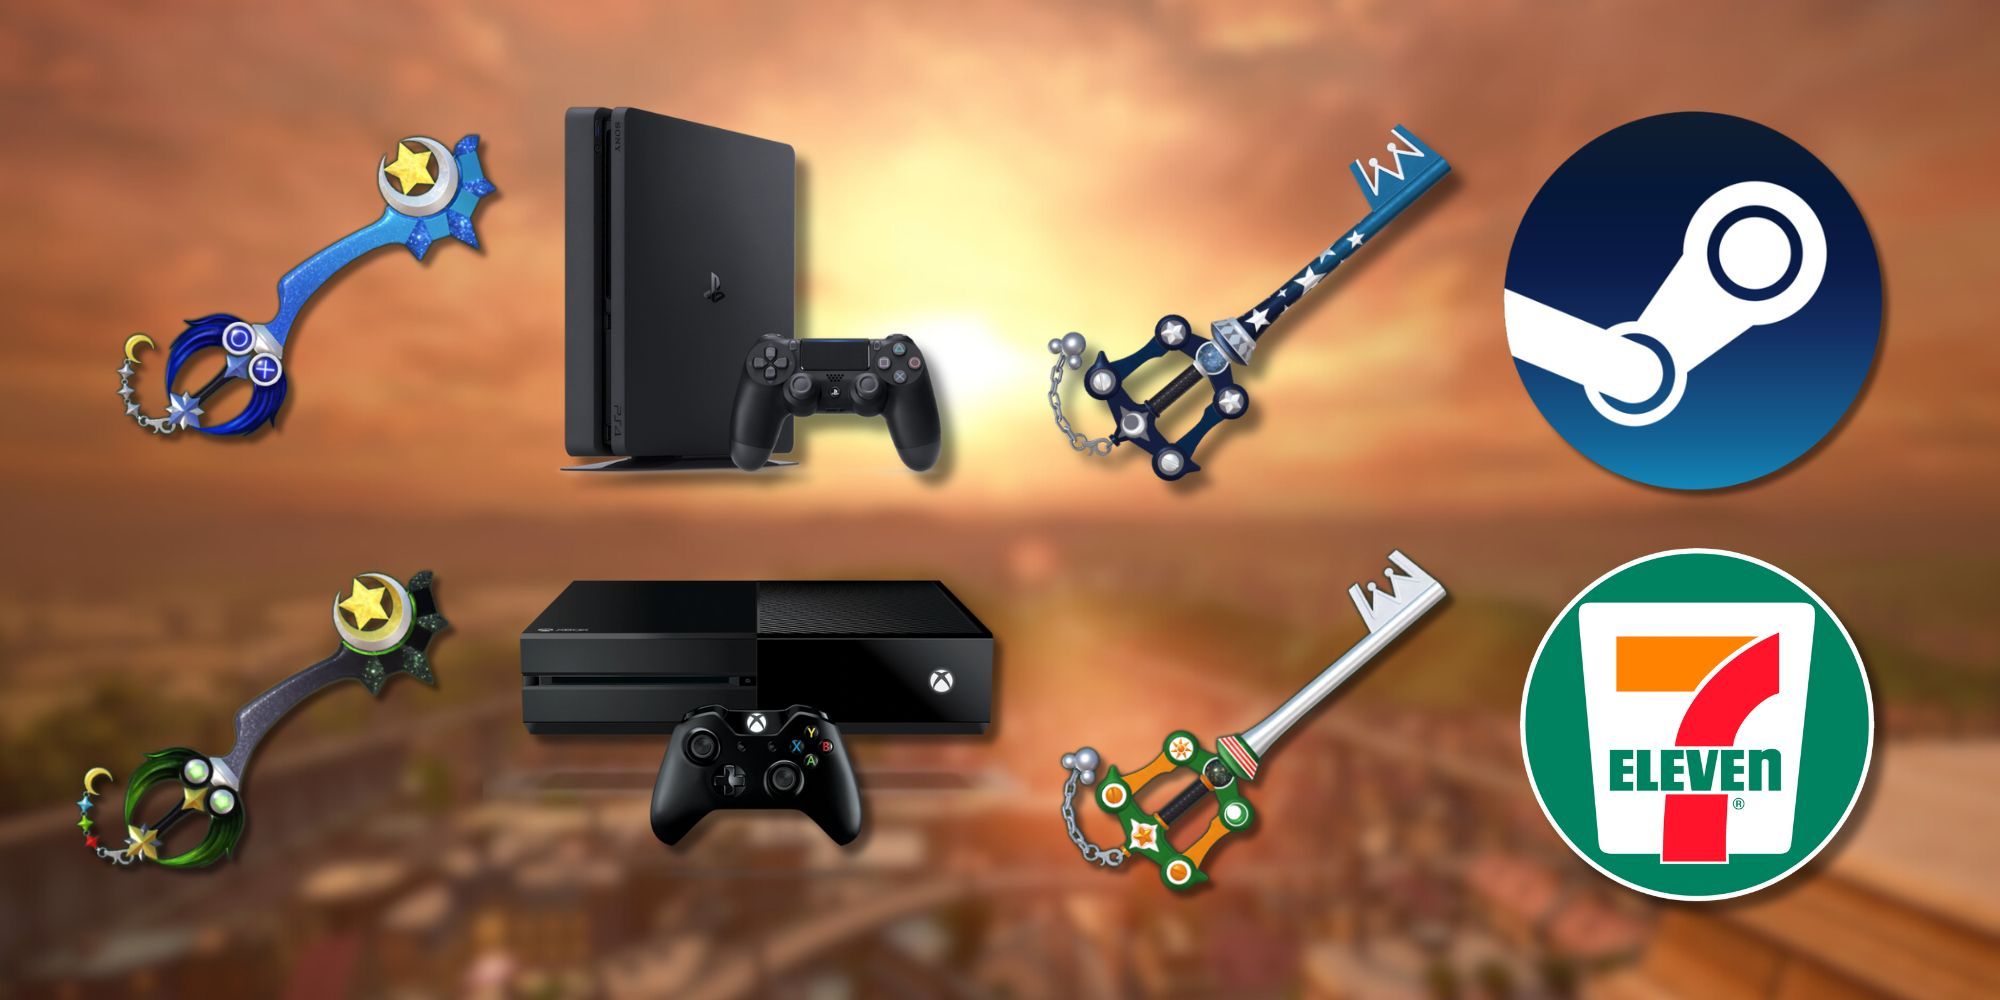 A collage of every system-exclusive Keyblade with their respective systems: Midnight Blue on PS4, Phantom Green on Xbox One, Dead of Night on Steam and Dawn Till Dusk on 7-Eleven.